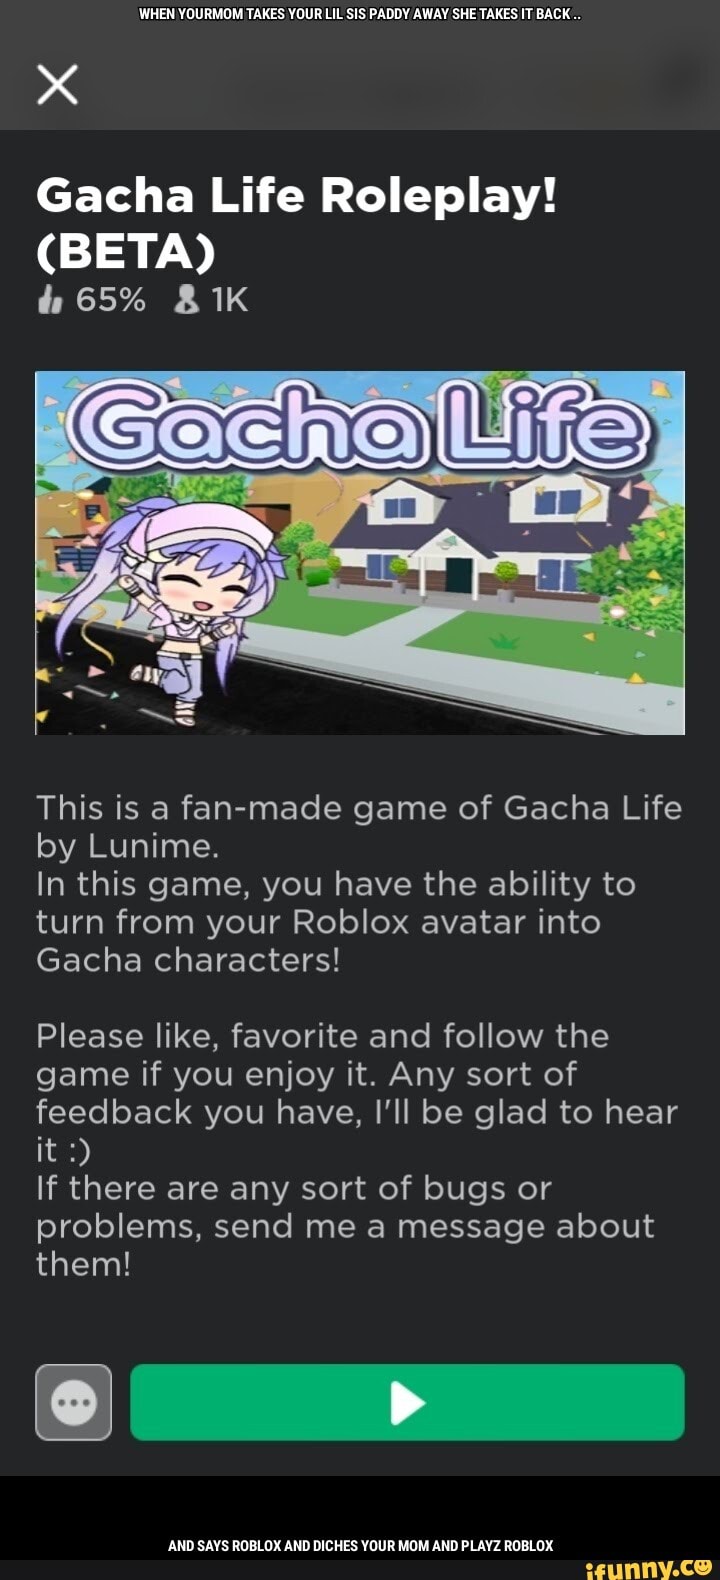 When Yourmom Takes Your Lil Sis Paddy Away She Takes It Back Gacha Life Roleplay Beta 465 This Is A Fan Made Game Of Gacha Life By Lunime In This Game You Have - gacha life roblox avatar